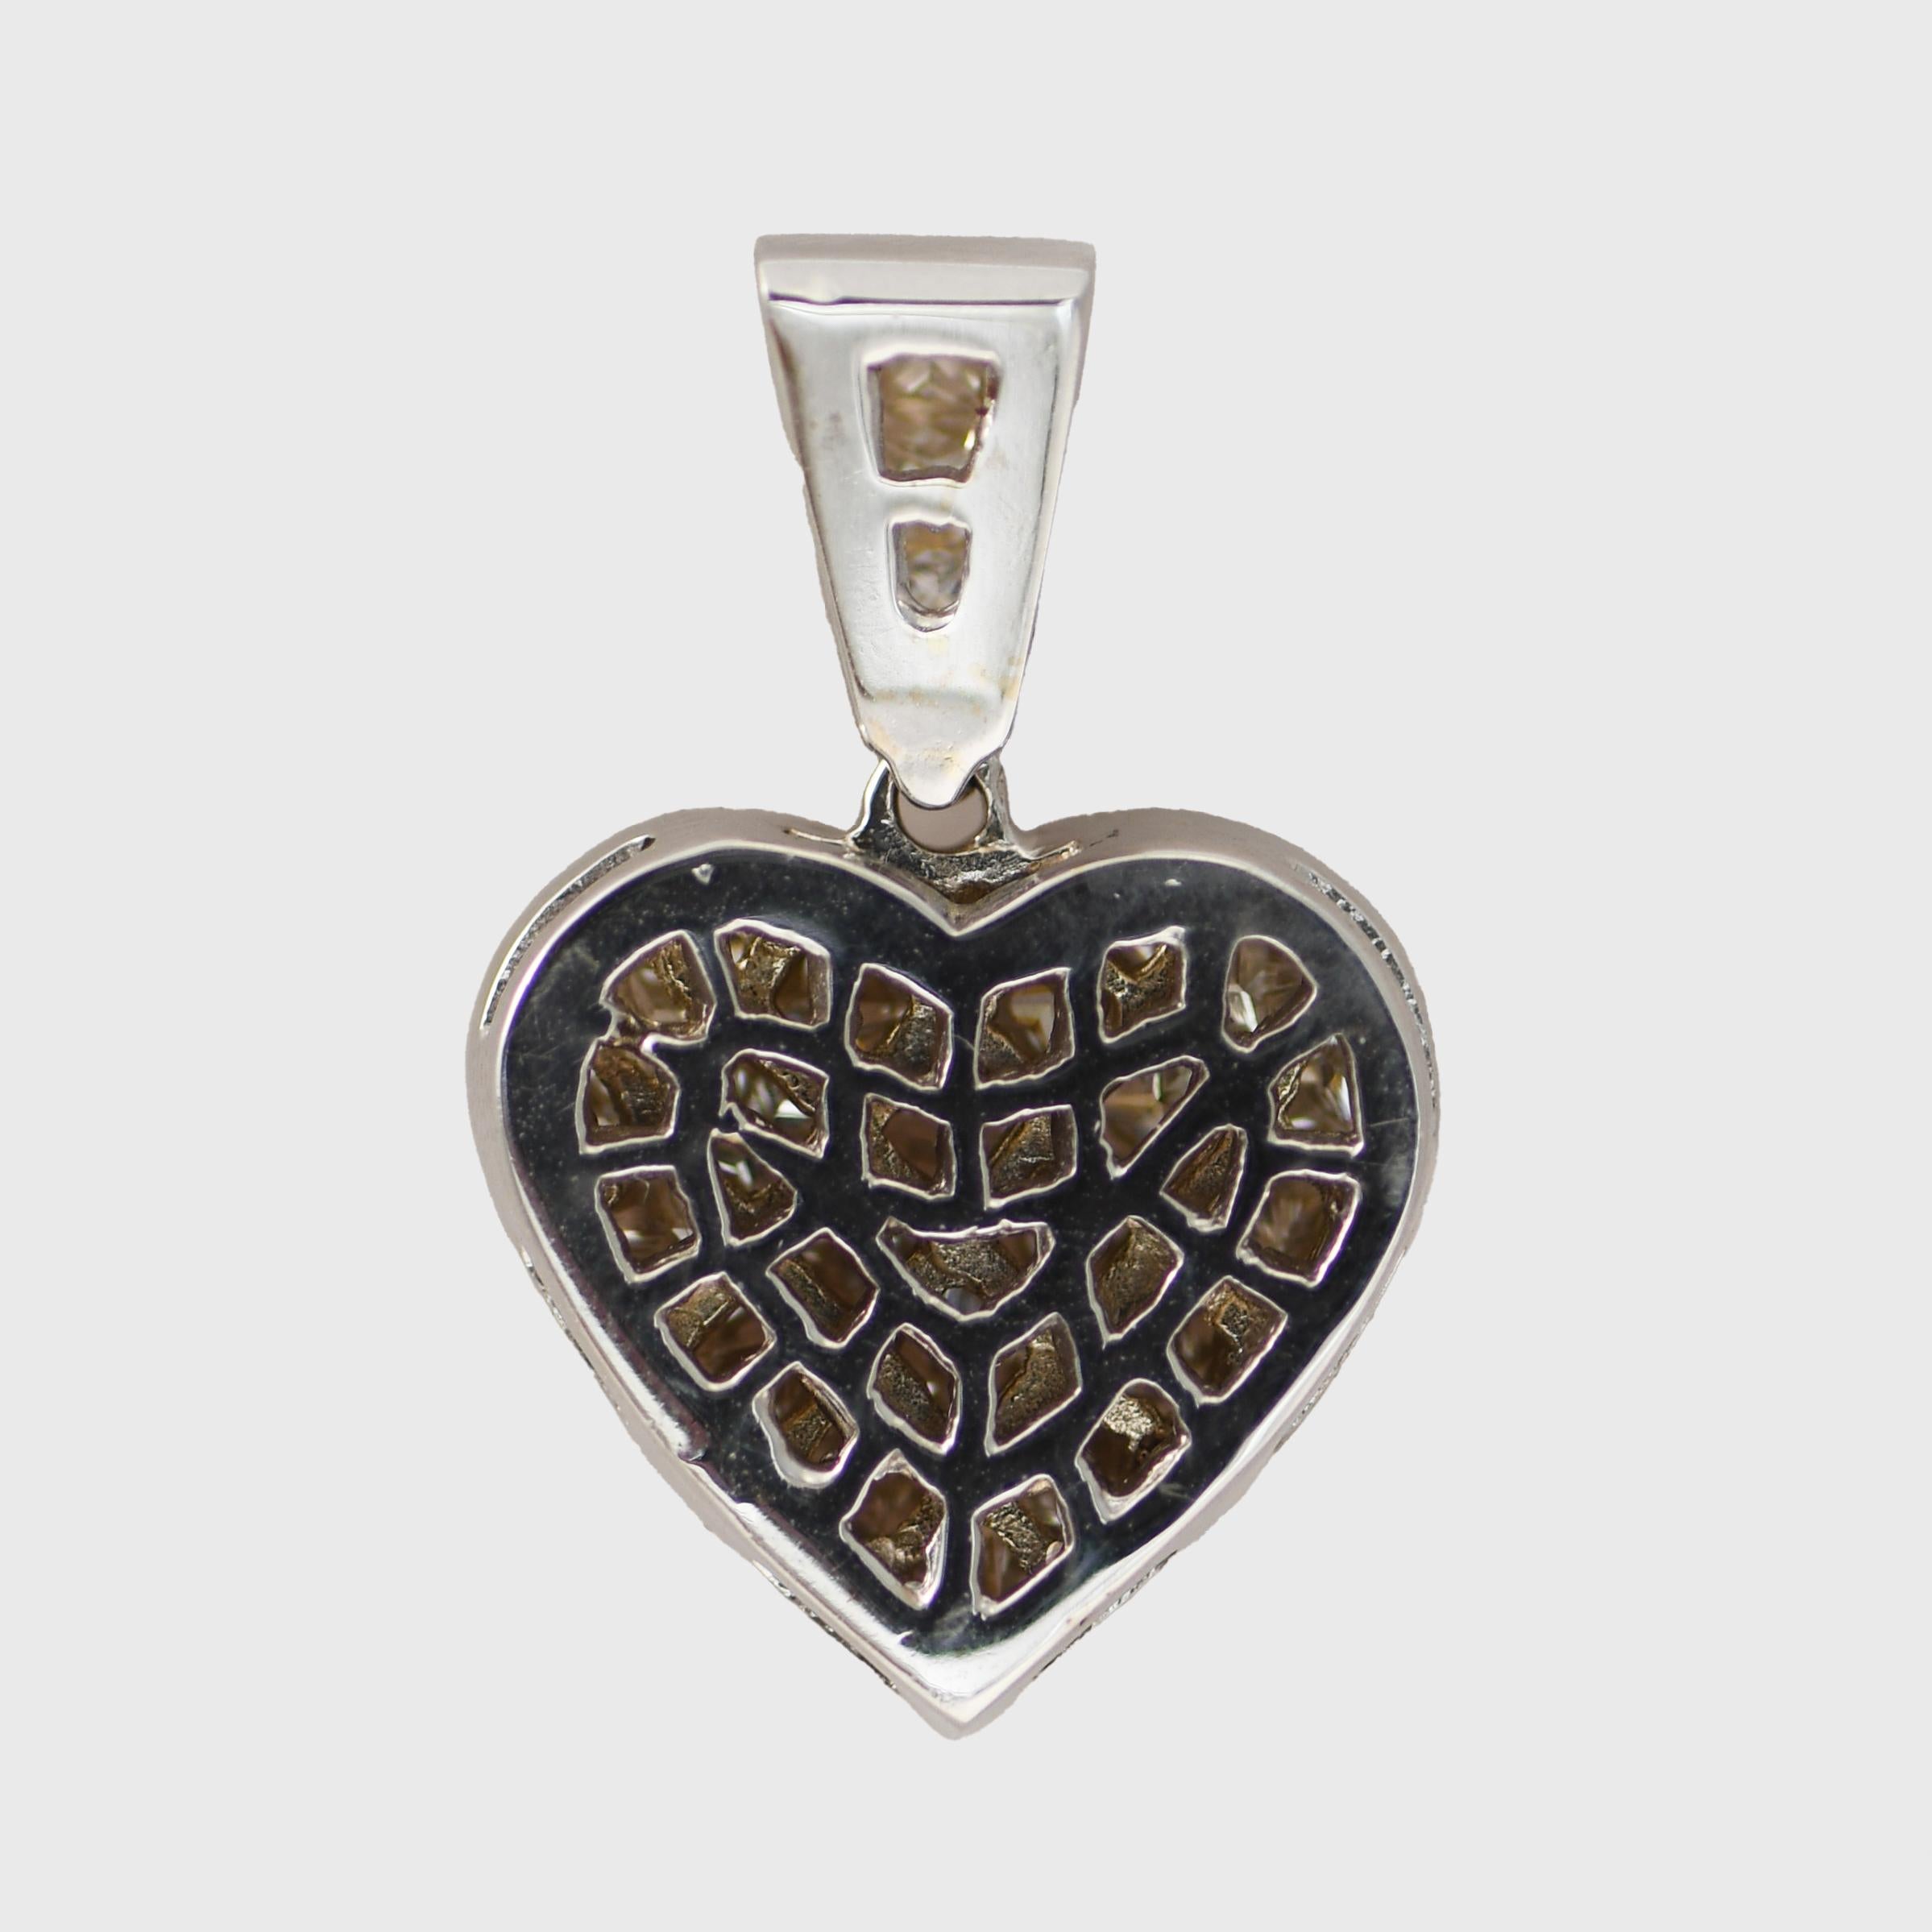 18K White Gold Diamond Cluster Heart Pendant 2.00tdw, 7g
Diamond cluster heart pendant with 18k white gold setting.
Tests 18k with an electronic tester and weighs 7 grams gross weight.
The diamonds are princess cuts, g, h, i color range, Si